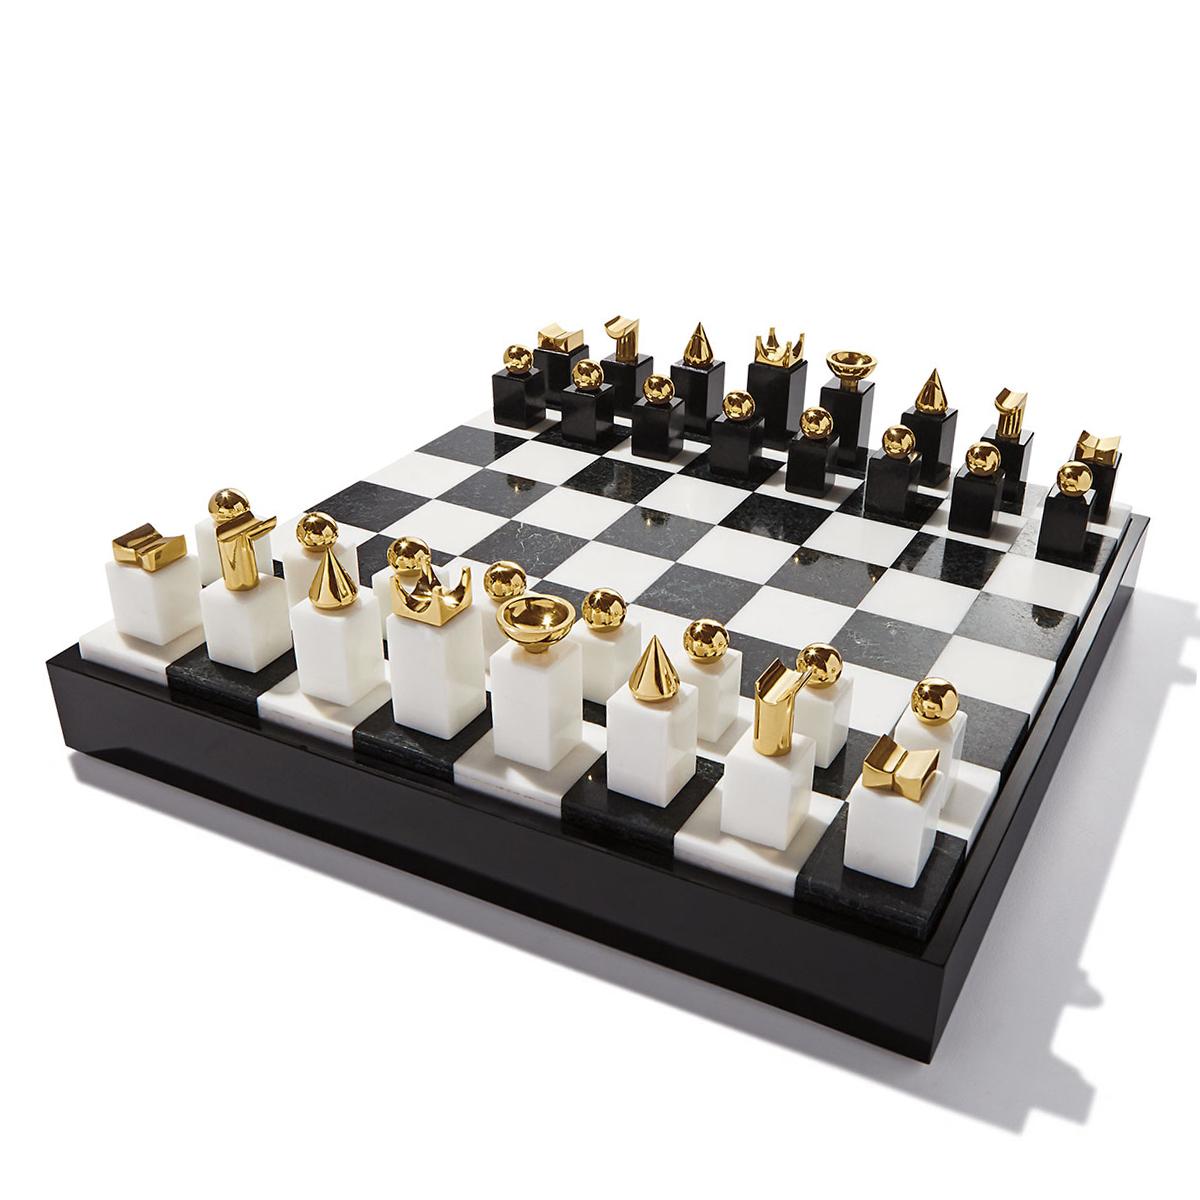 Portuguese Stones Chess Game For Sale